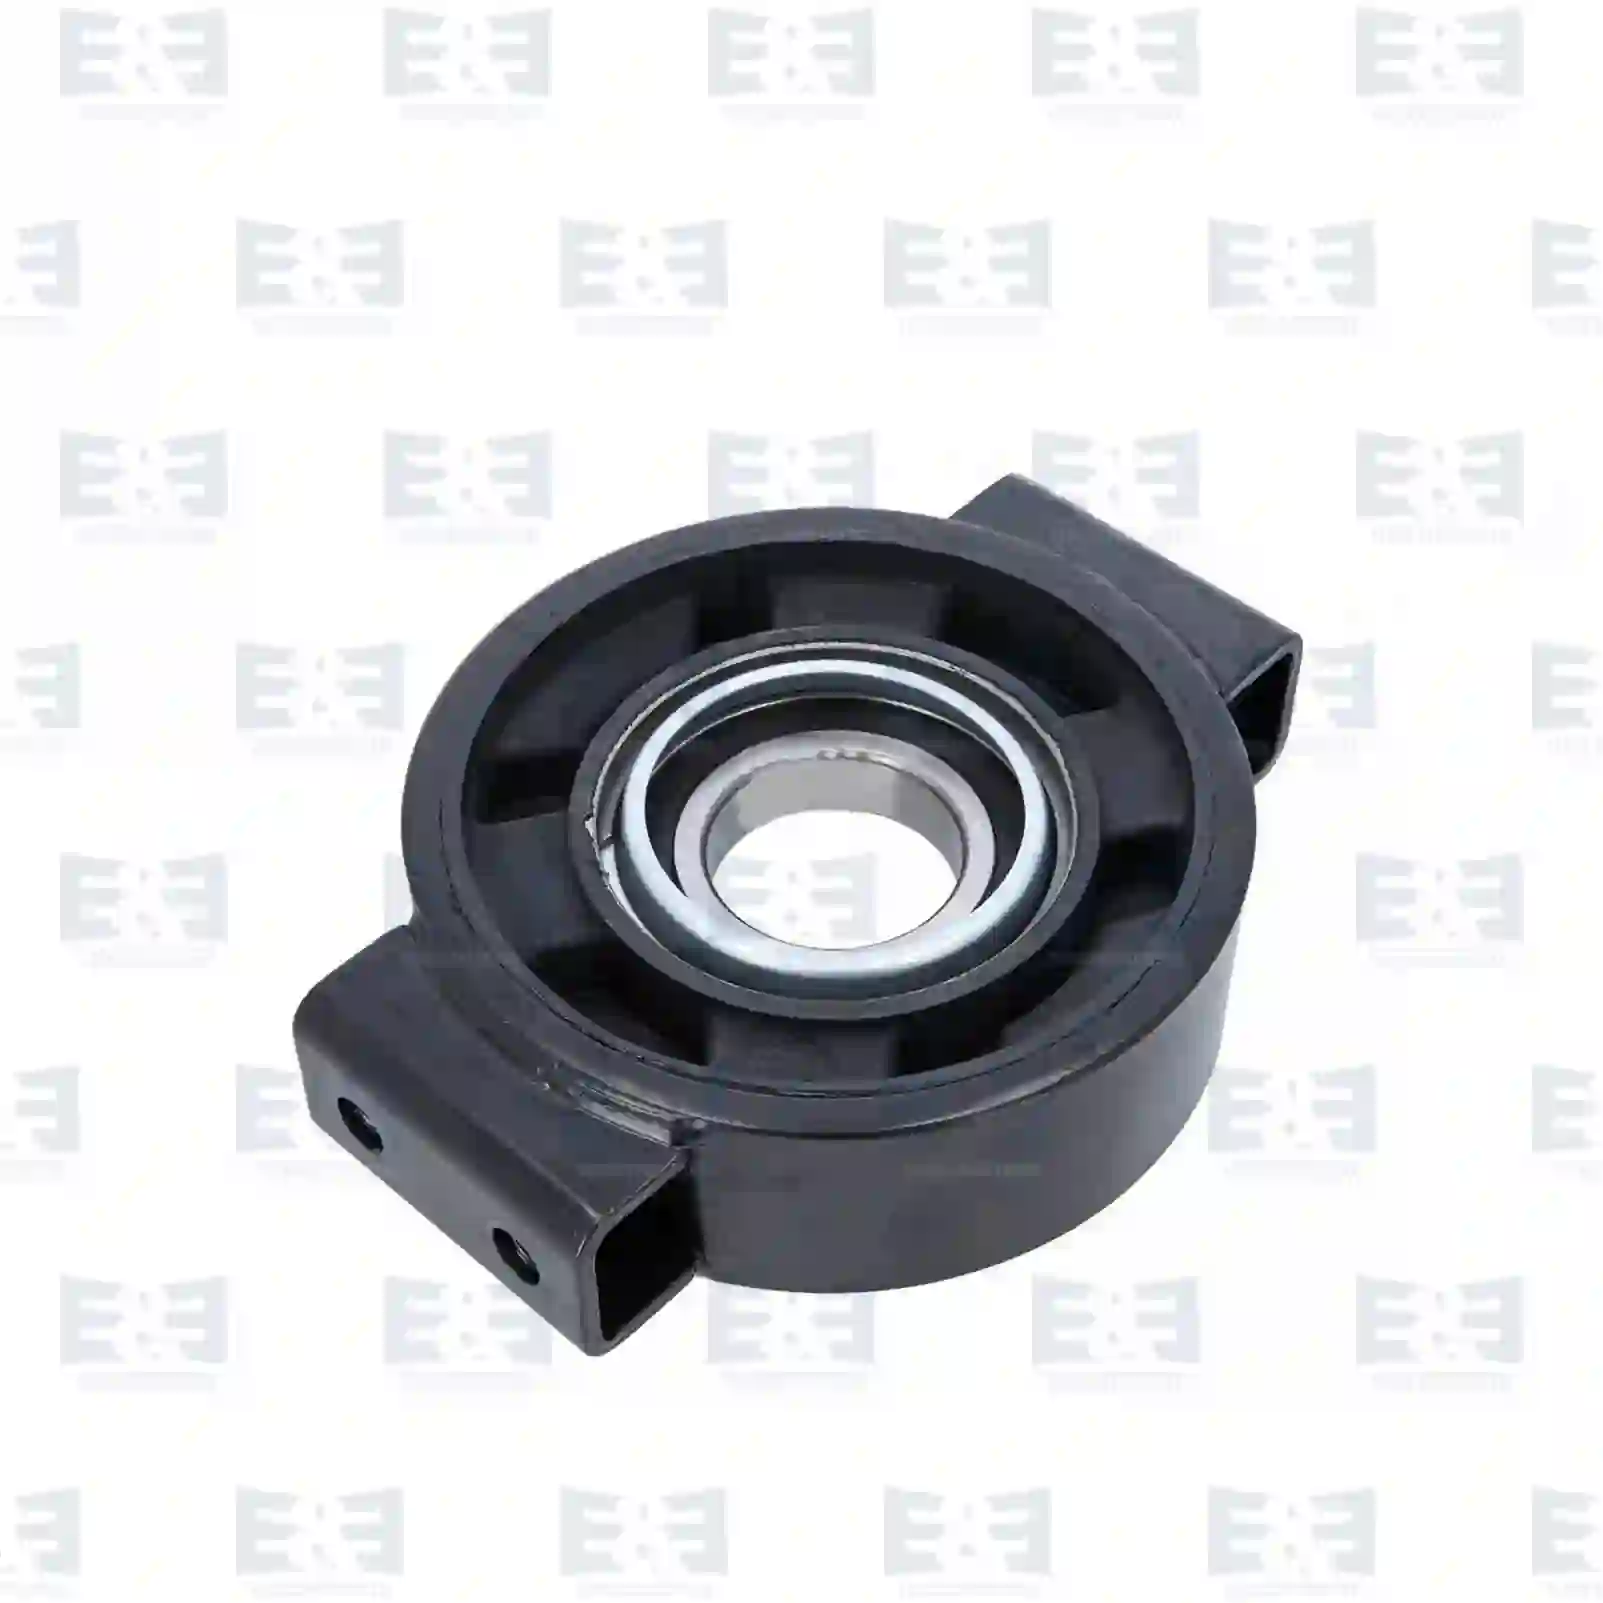 Support Bearing Center bearing, EE No 2E2276856 ,  oem no:3894100122, 3894100222, 6544100022, ZG02480-0008 E&E Truck Spare Parts | Truck Spare Parts, Auotomotive Spare Parts